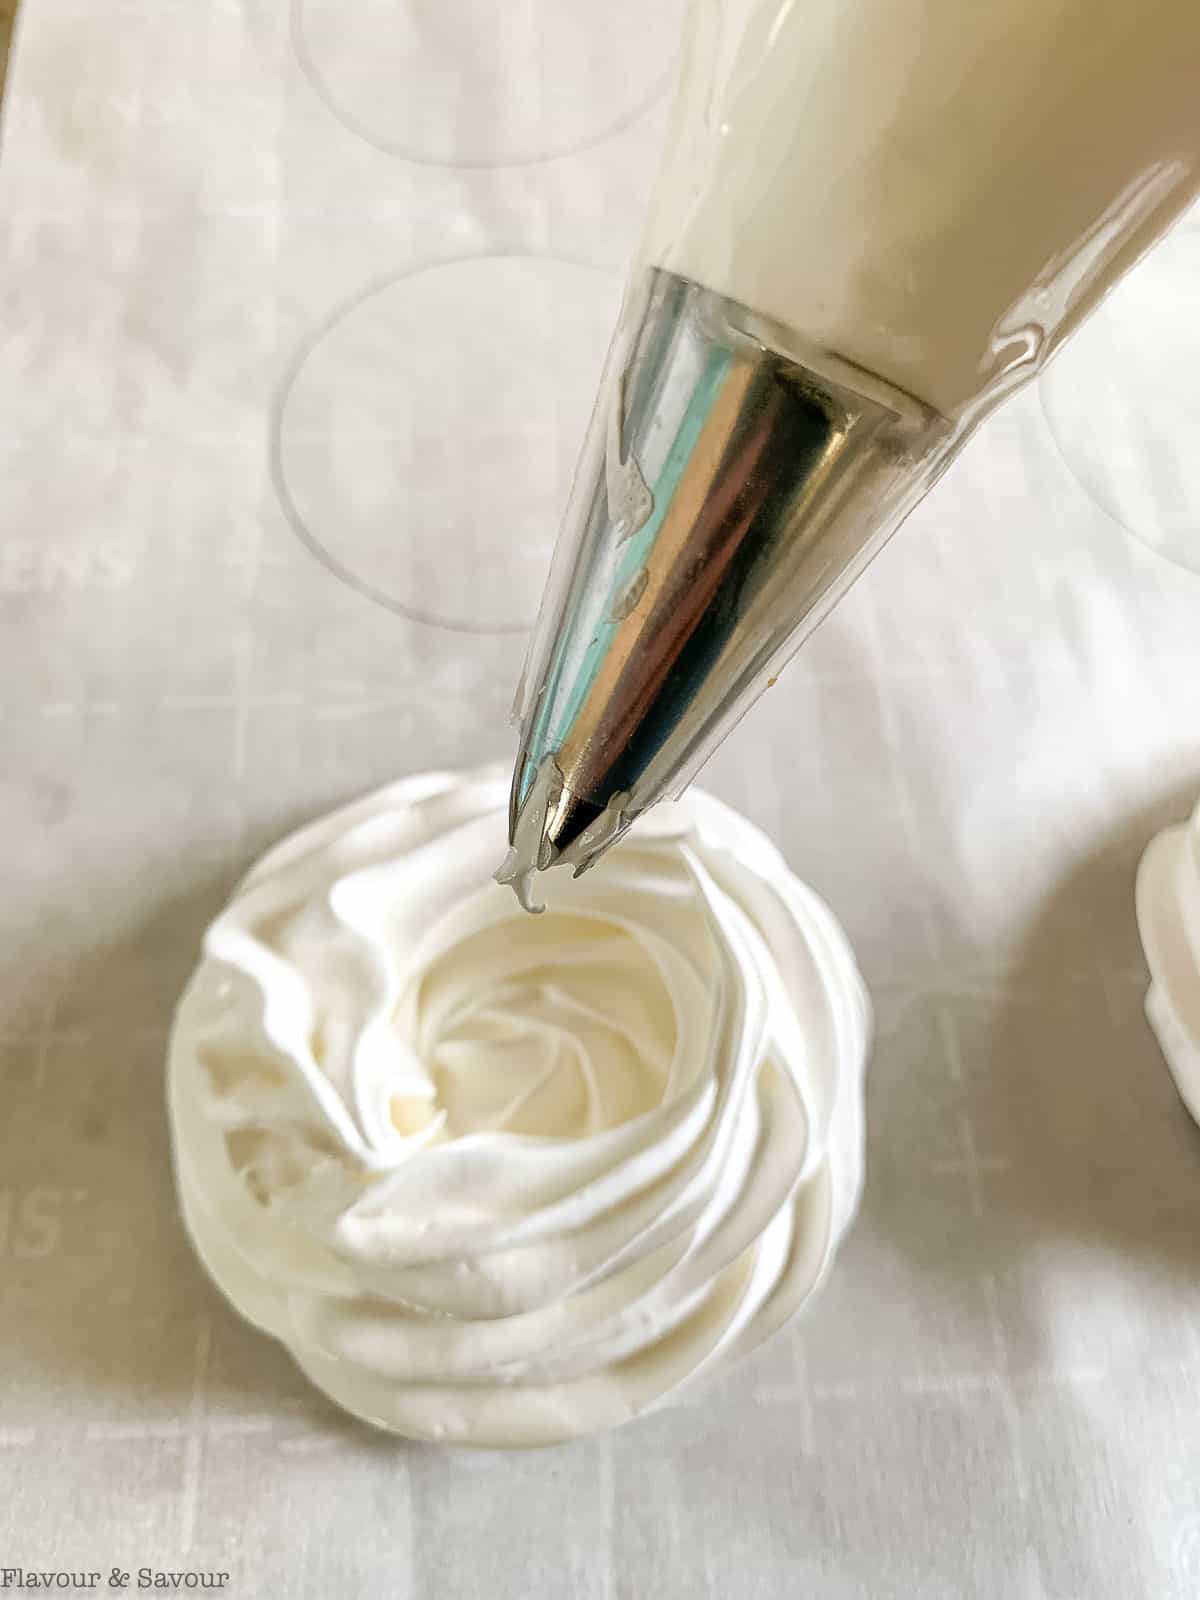 Using a piping tube to form meringue nests for pavlova.